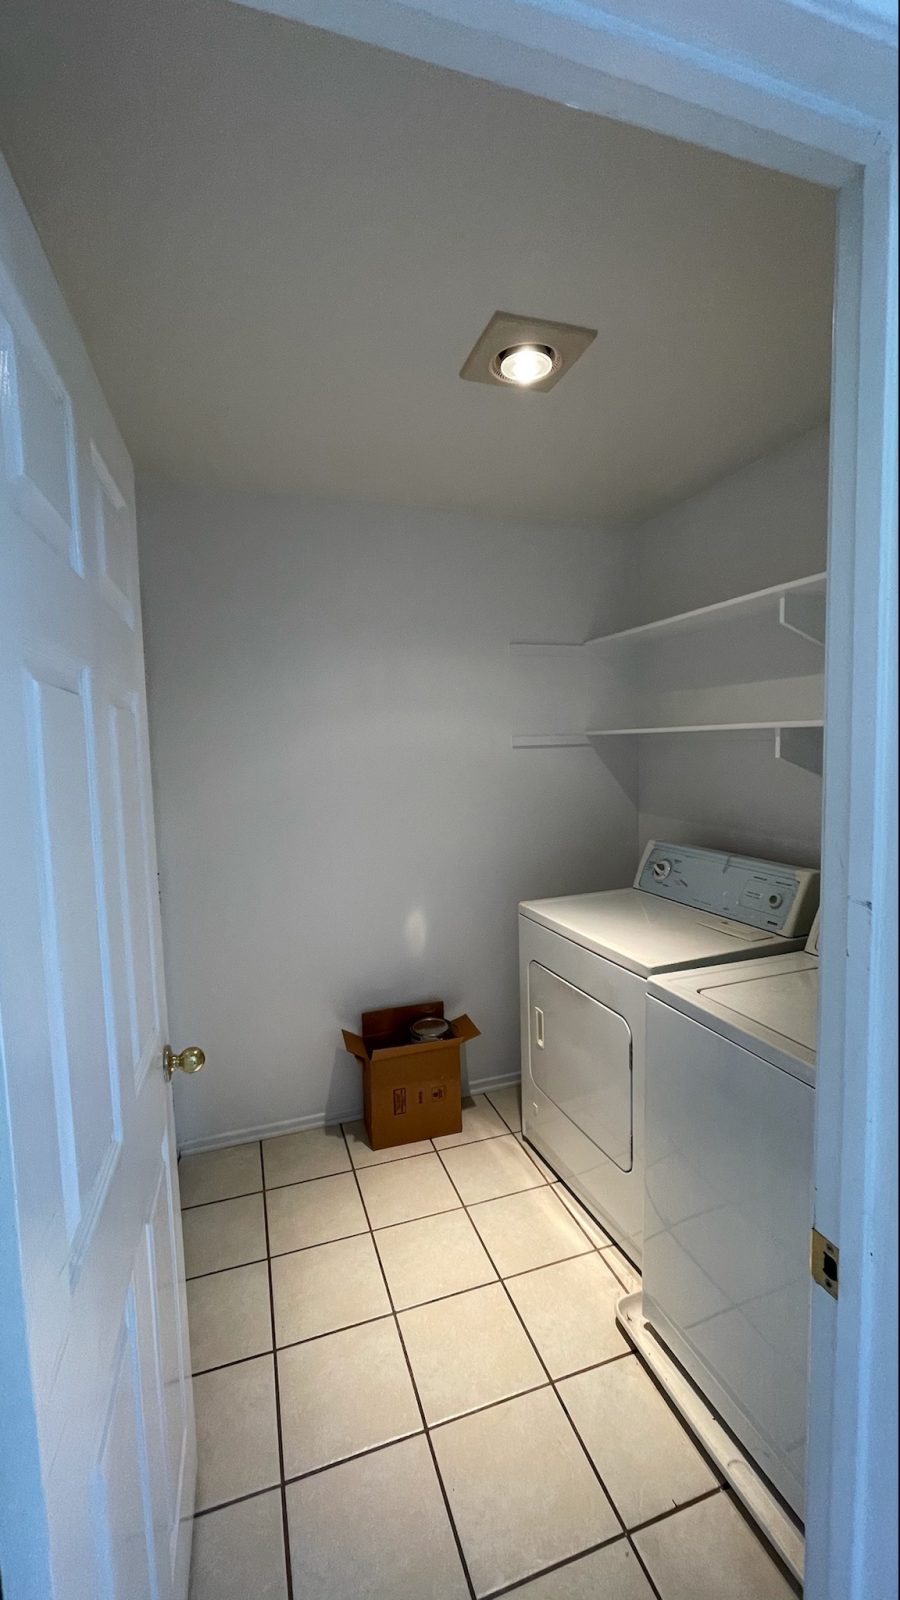 A laundry room painted a very light gray. Preview Image 1